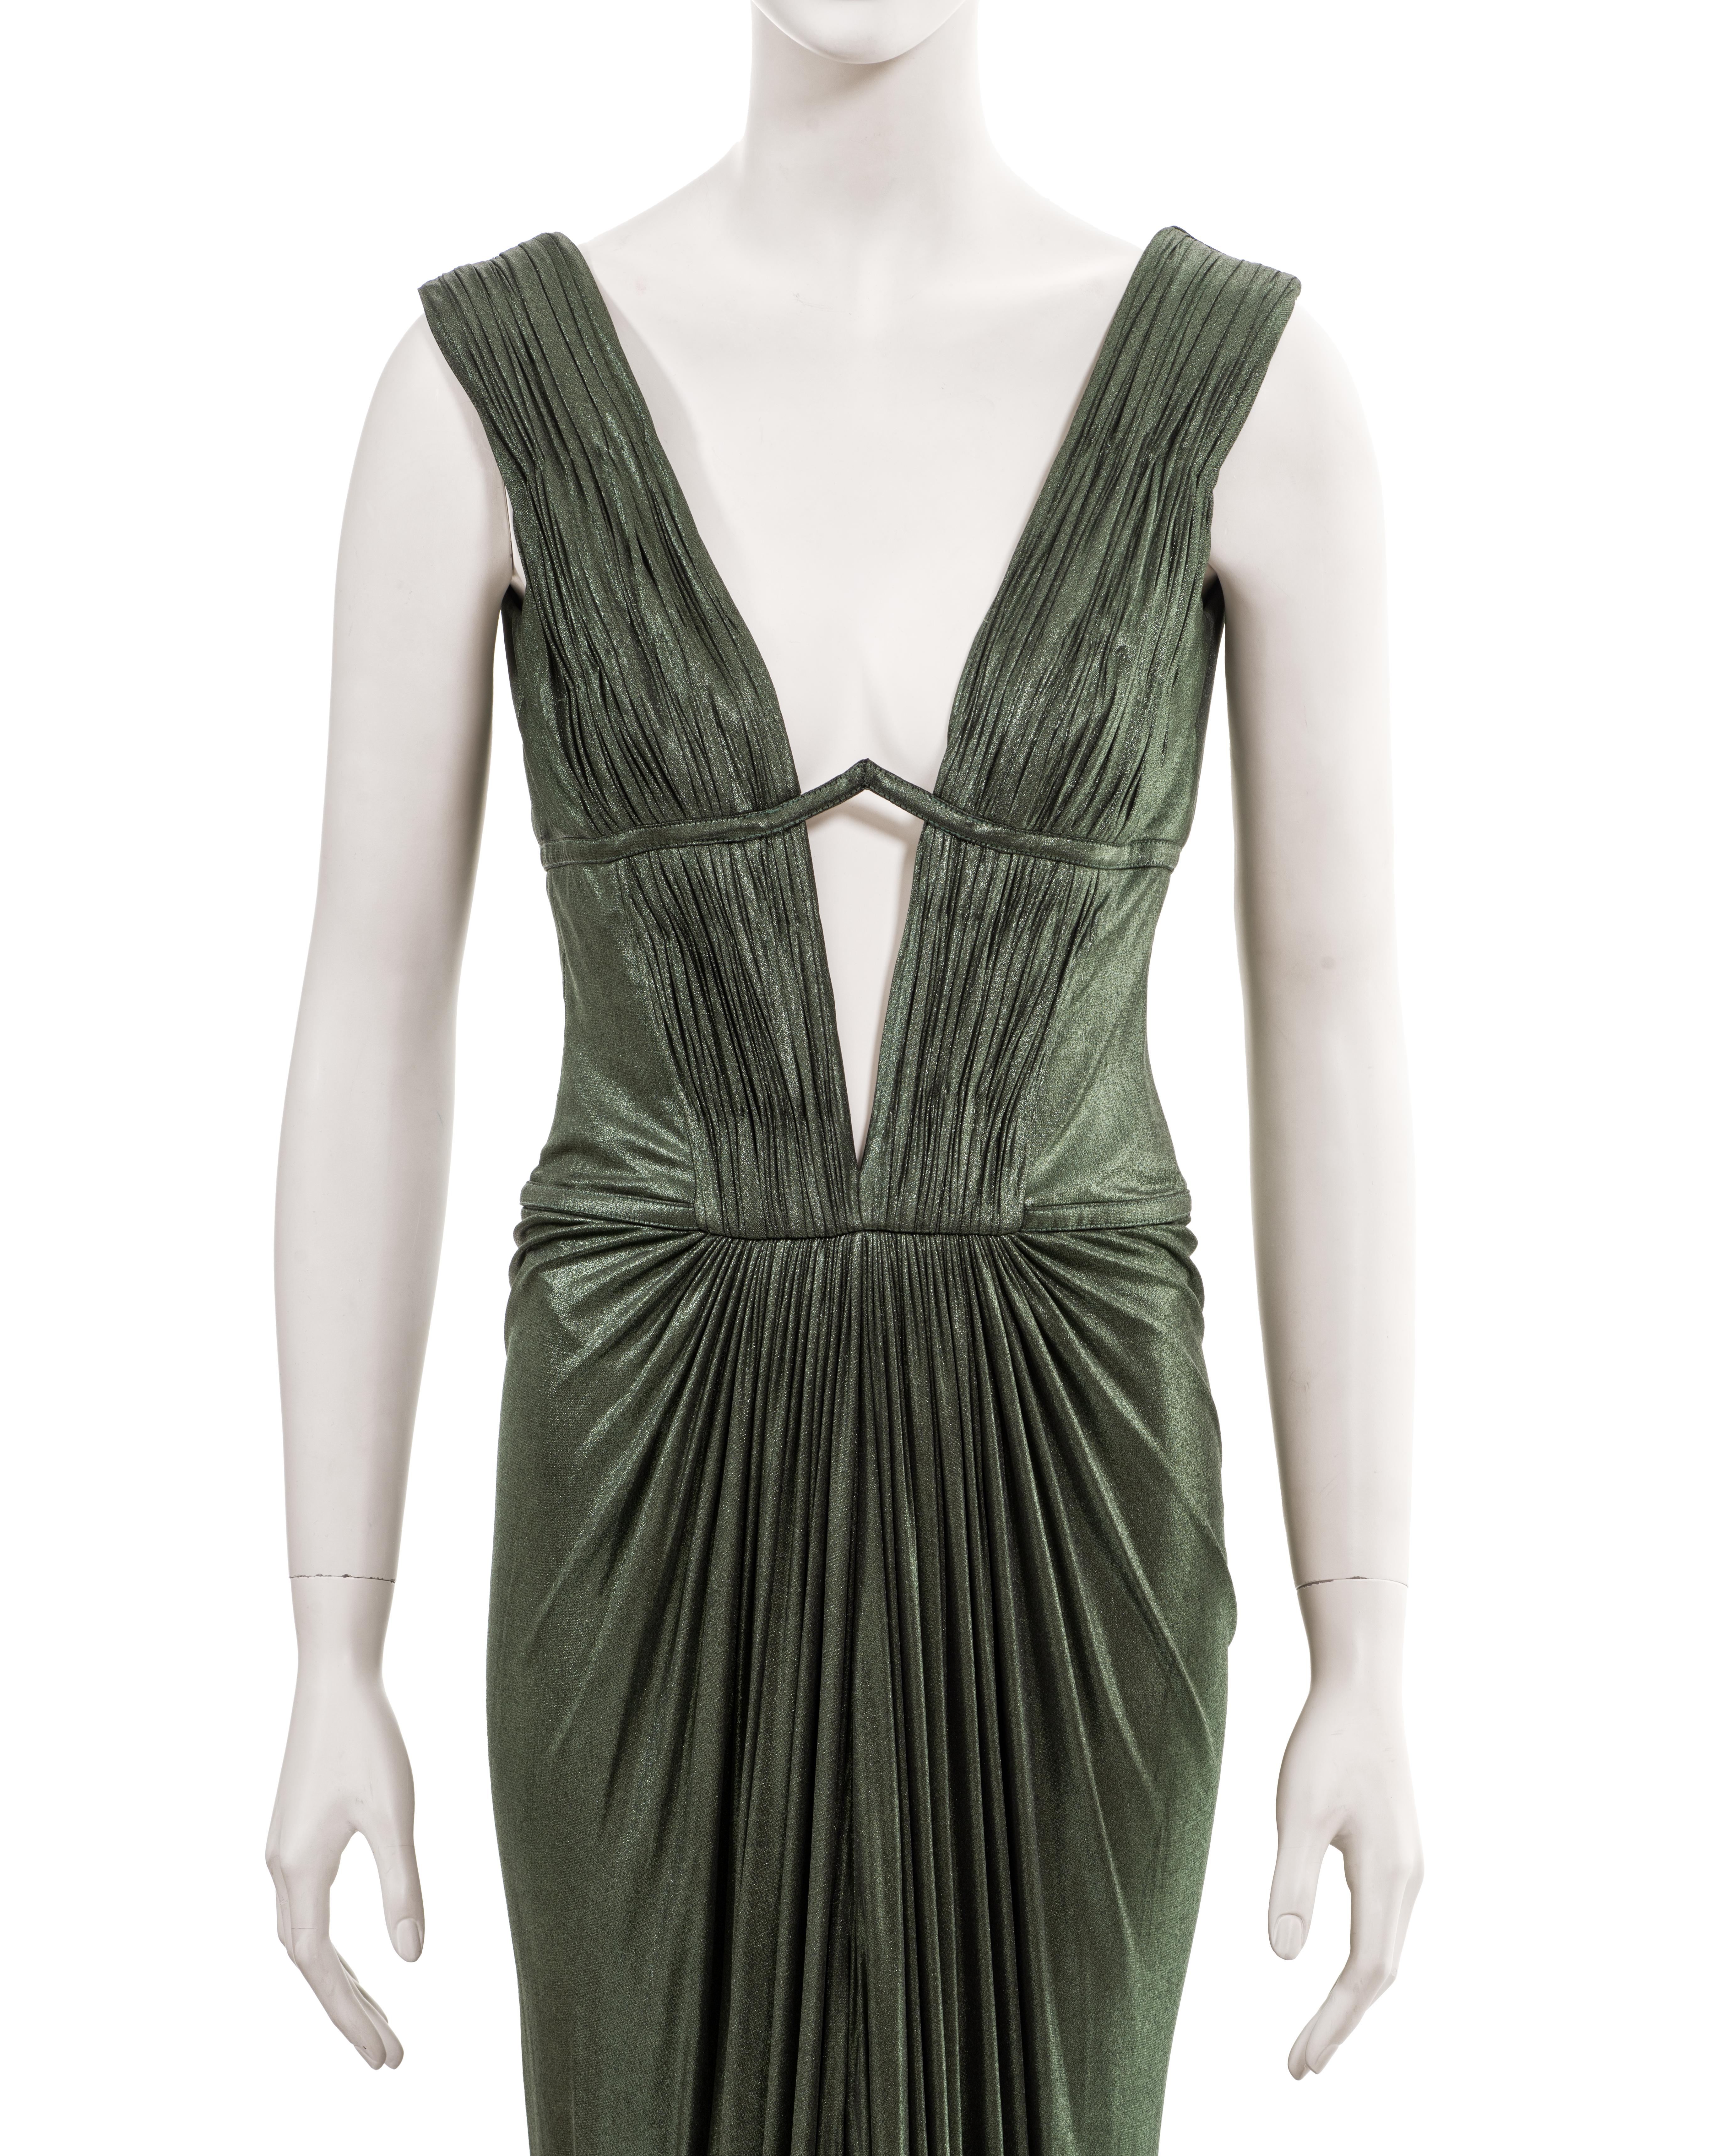 Roberto Cavalli pleated metallic green cupro 'Cleopatra' evening dress, fw 2007 In Excellent Condition For Sale In London, GB